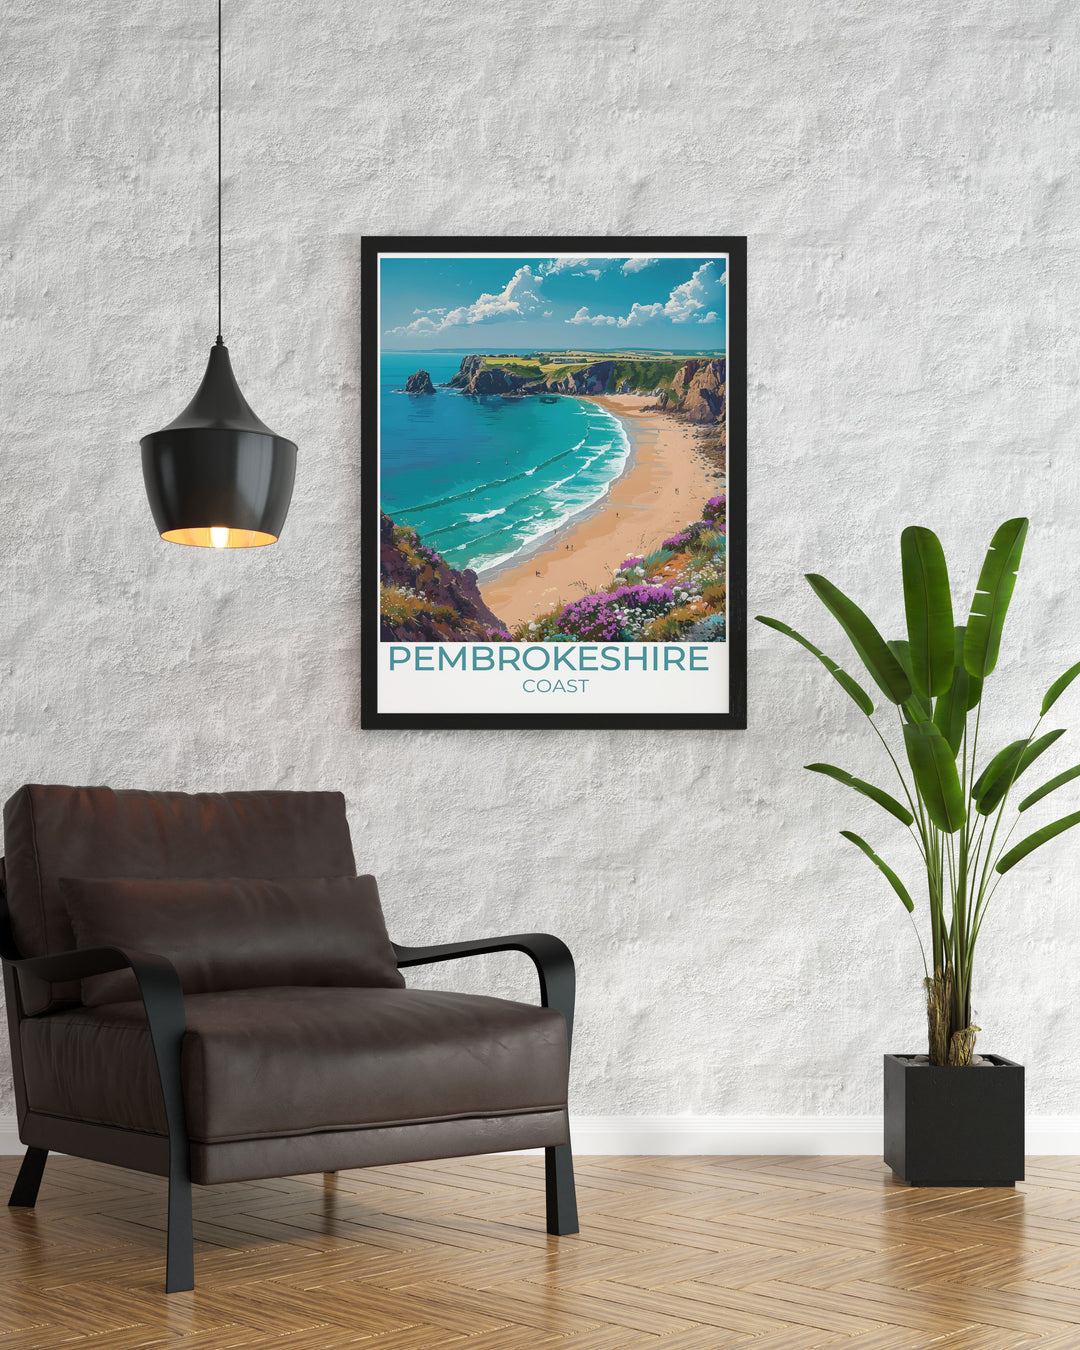 National Park print showcasing Barafundle Bay in Pembrokeshire Coast National Park with beautiful retro design ideal for vintage travel poster collectors and those looking to bring a piece of Wales national park into their living space.